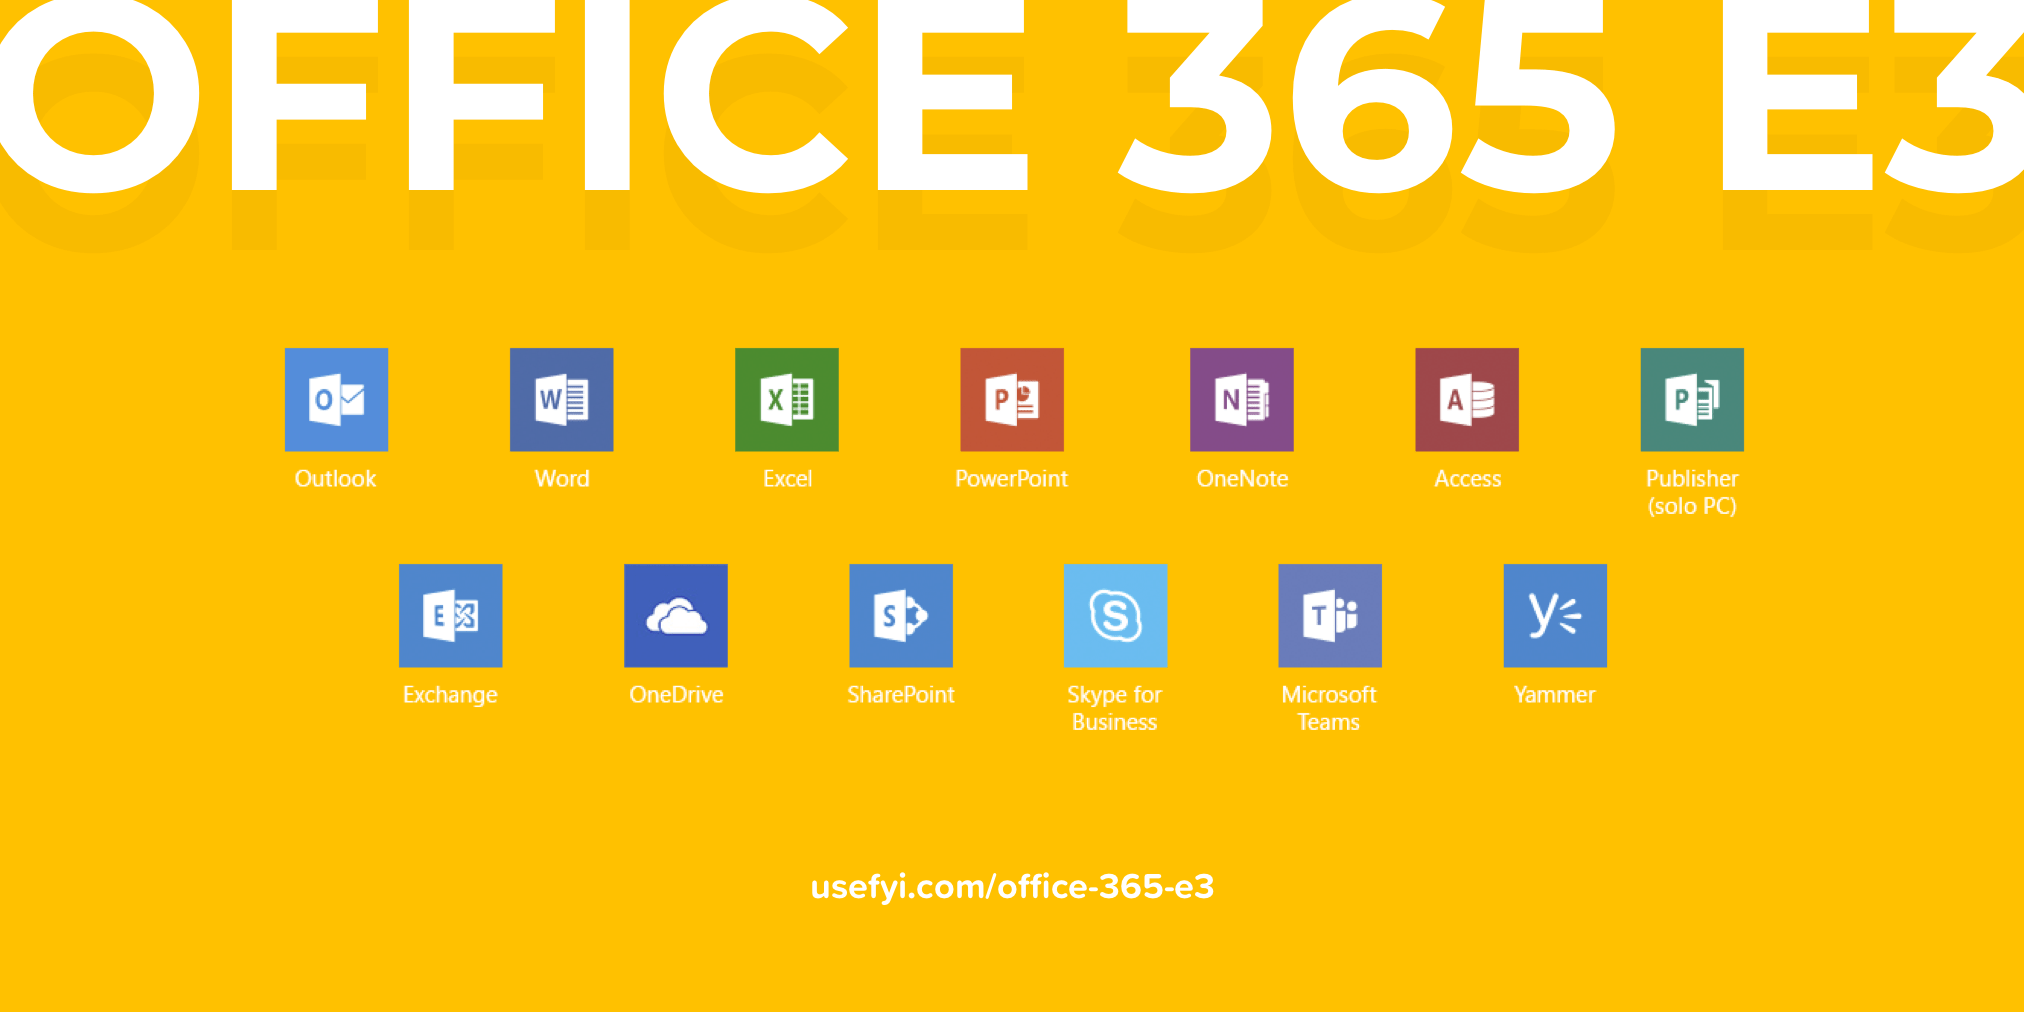 Microsoft 365 (Office 365): Everything you need to know